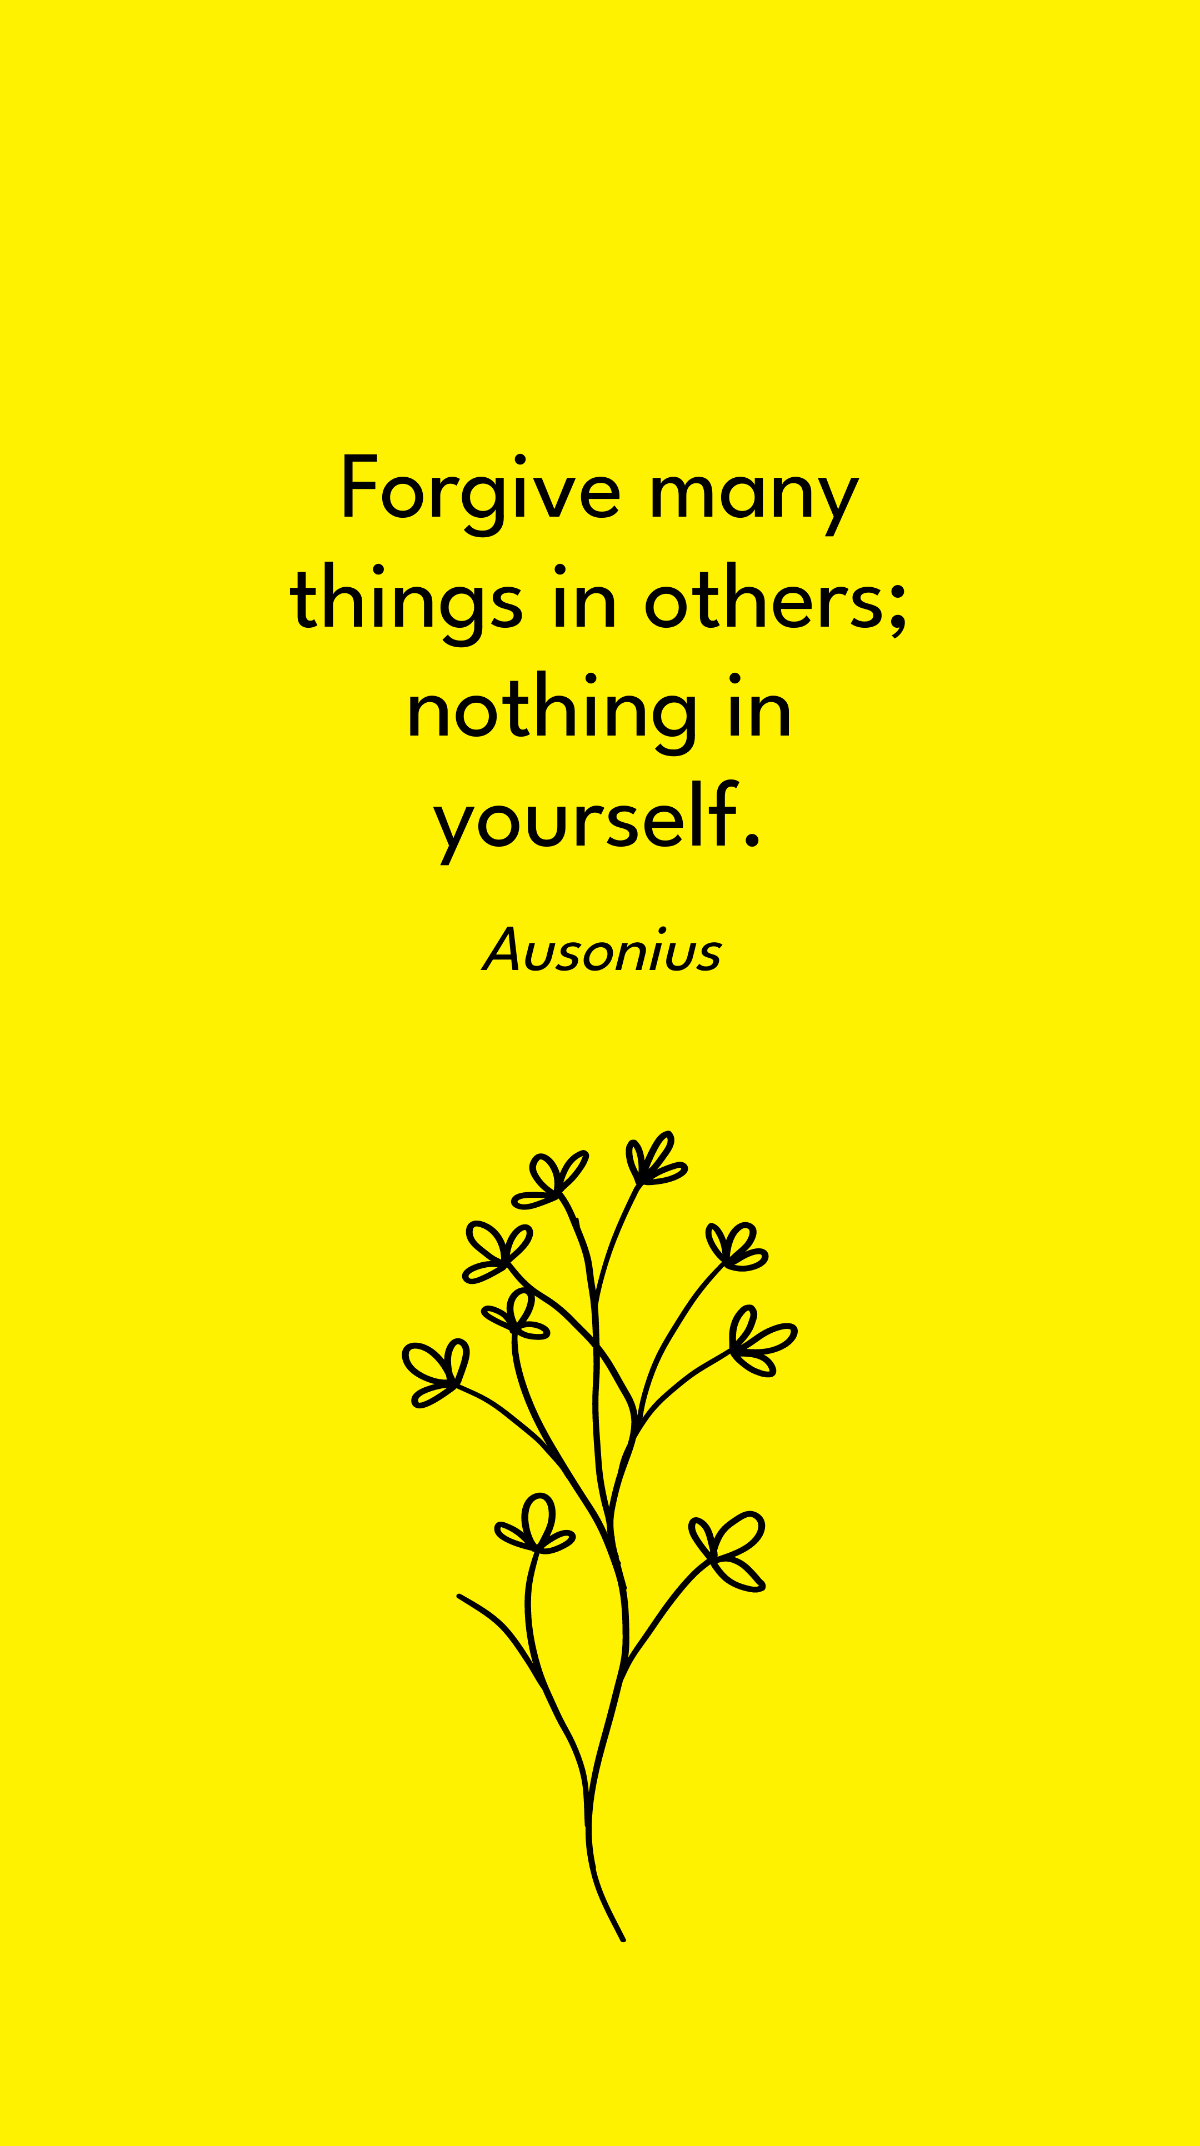 Ausonius - Forgive many things in others; nothing in yourself.